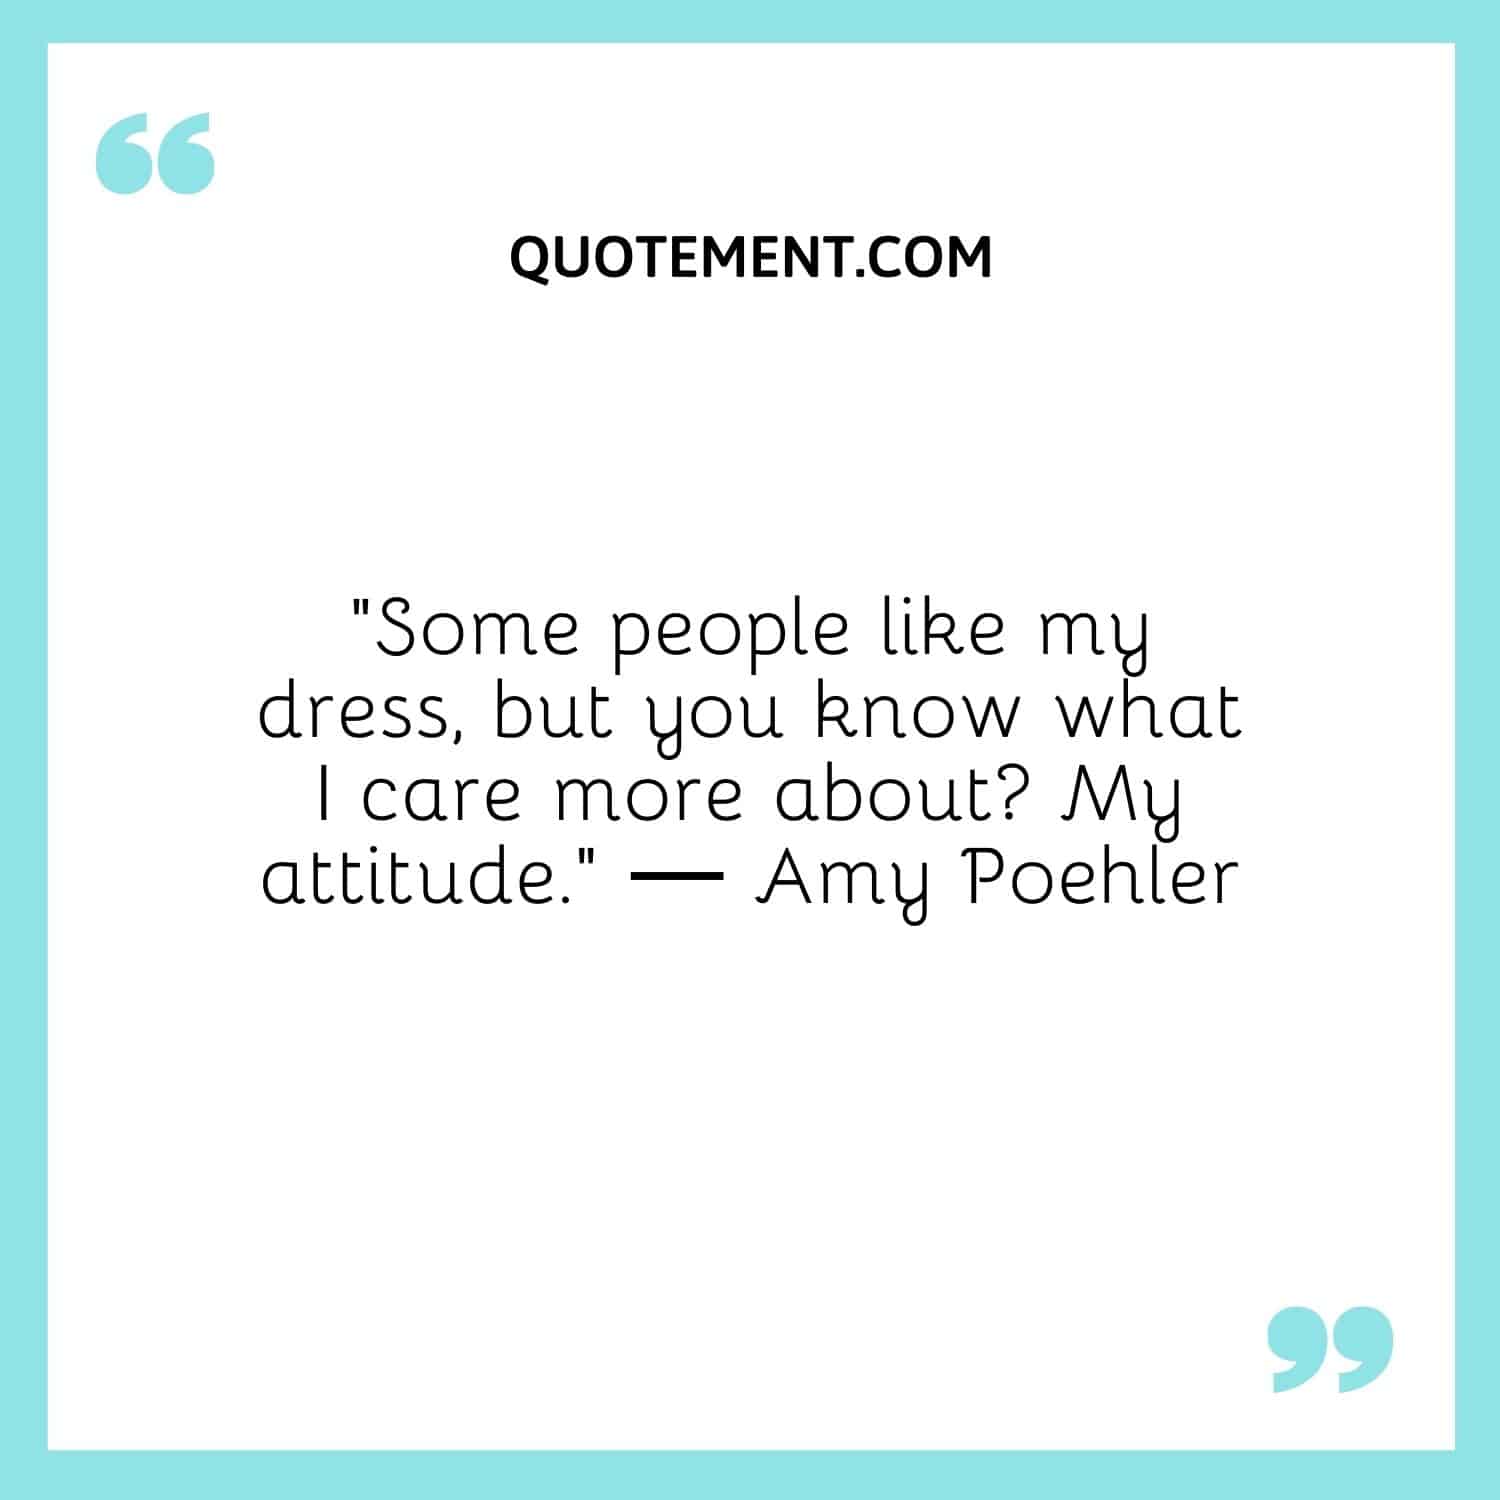 Some people like my dress, but you know what I care more about My attitude.